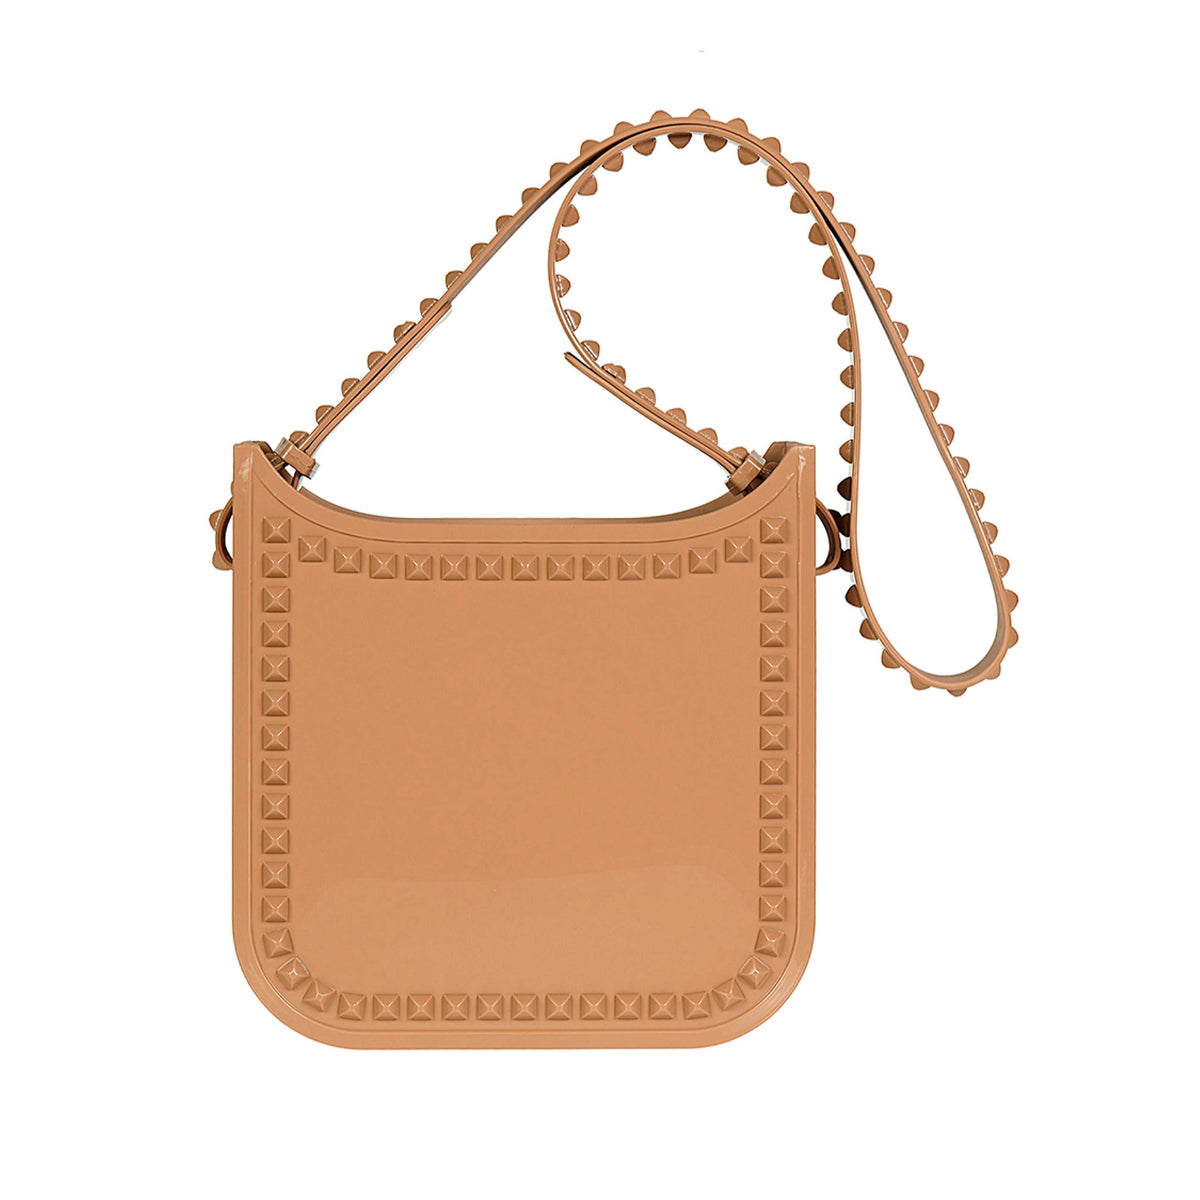 Toni recyclable jelly bags in color nude from Carmen Sol